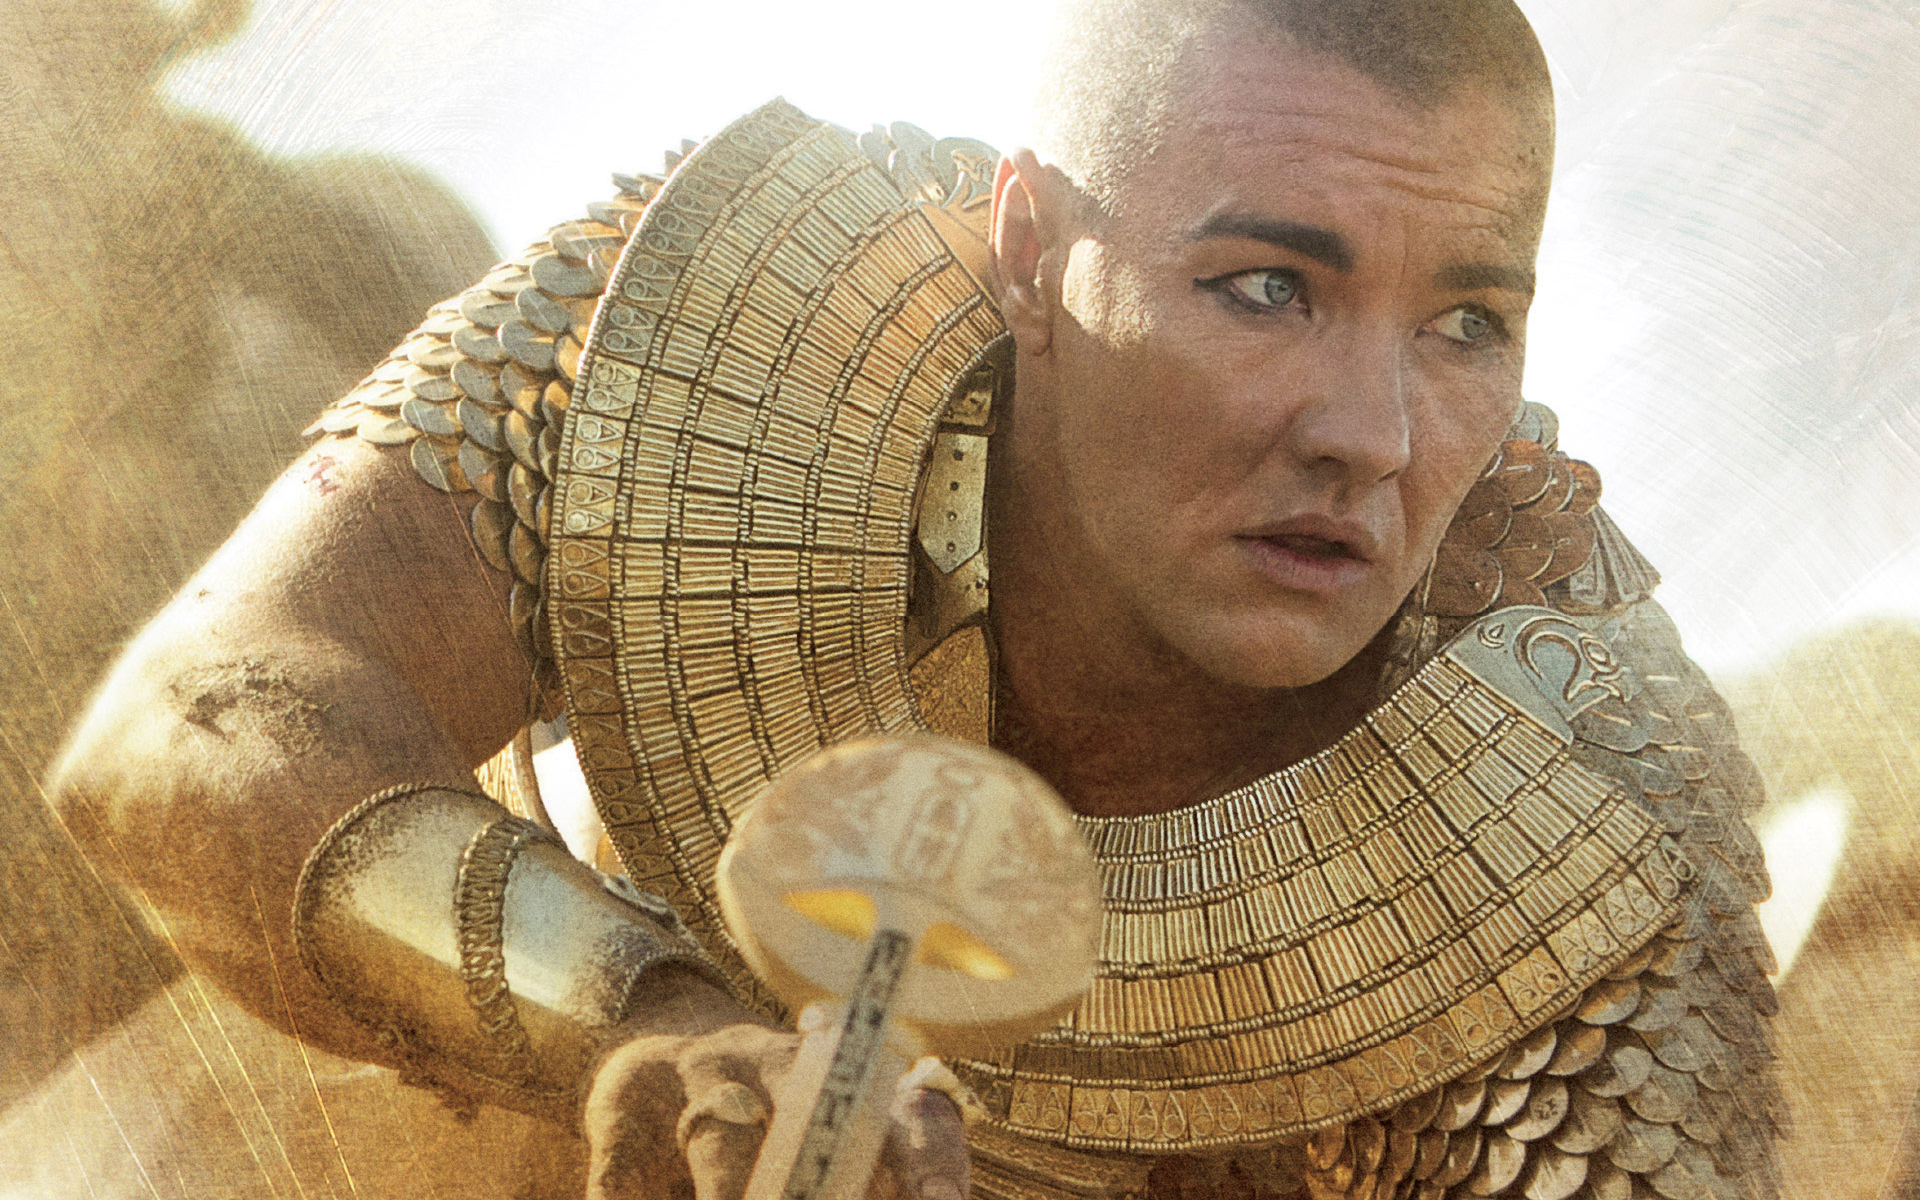 Movie Exodus: Gods and Kings HD Wallpaper Background Image.